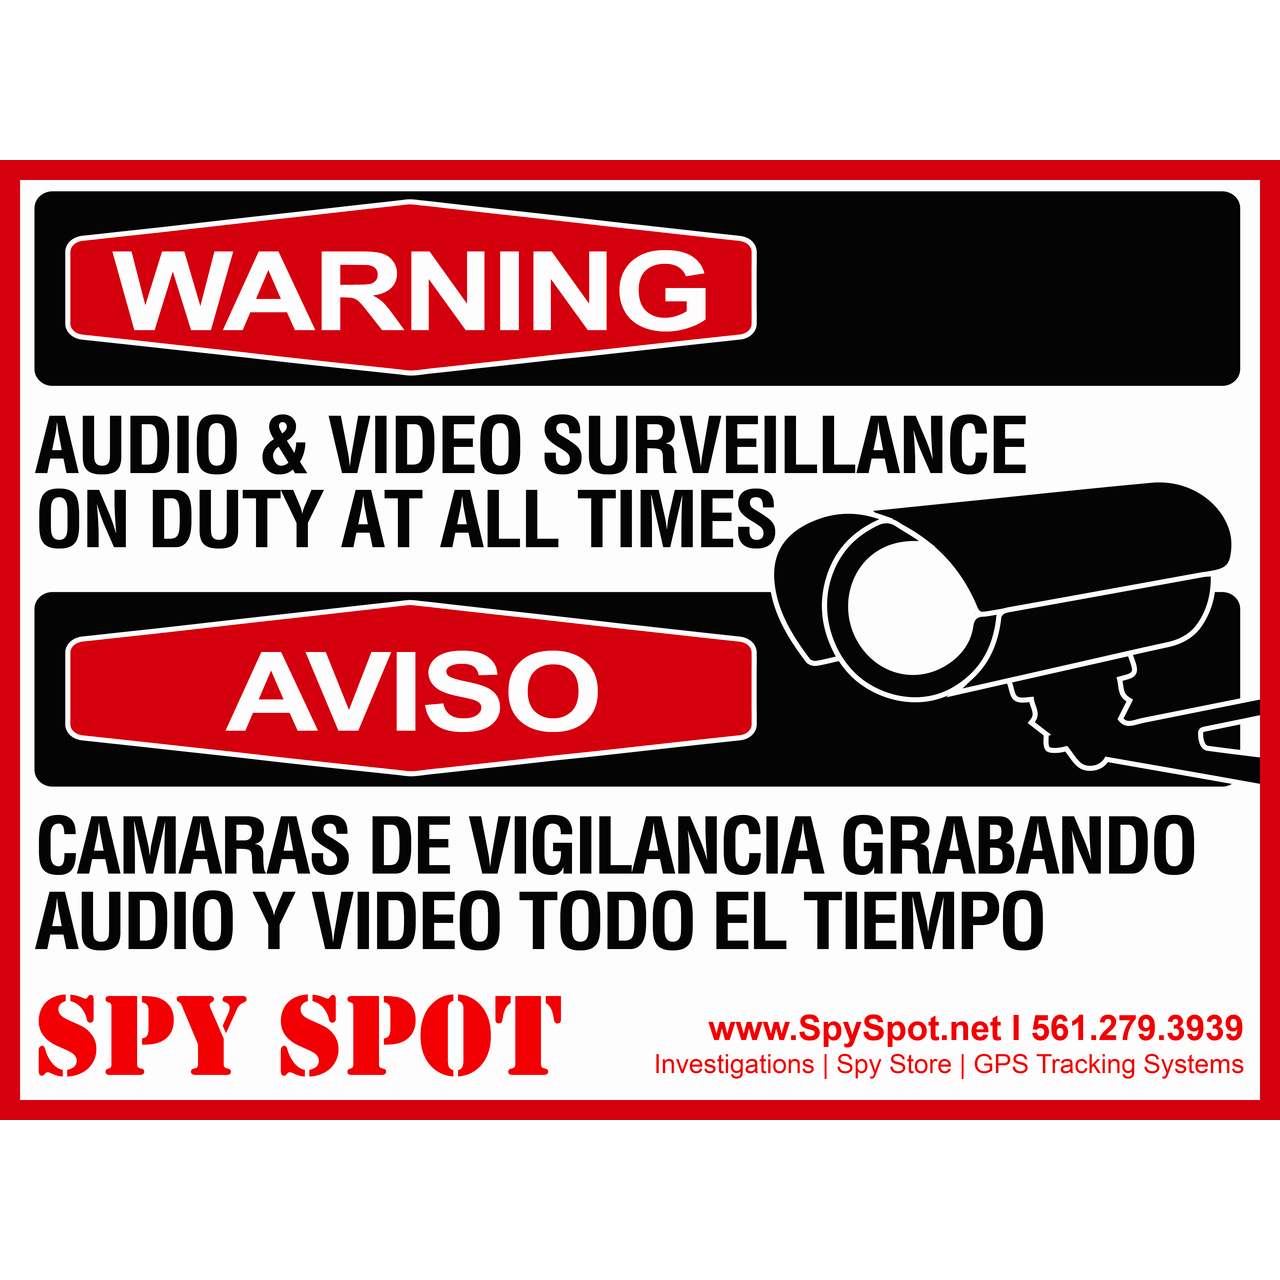 Warning Audio and Video Surveillance on Duty at All Times Plastic CCTV Sign in English/Spanish